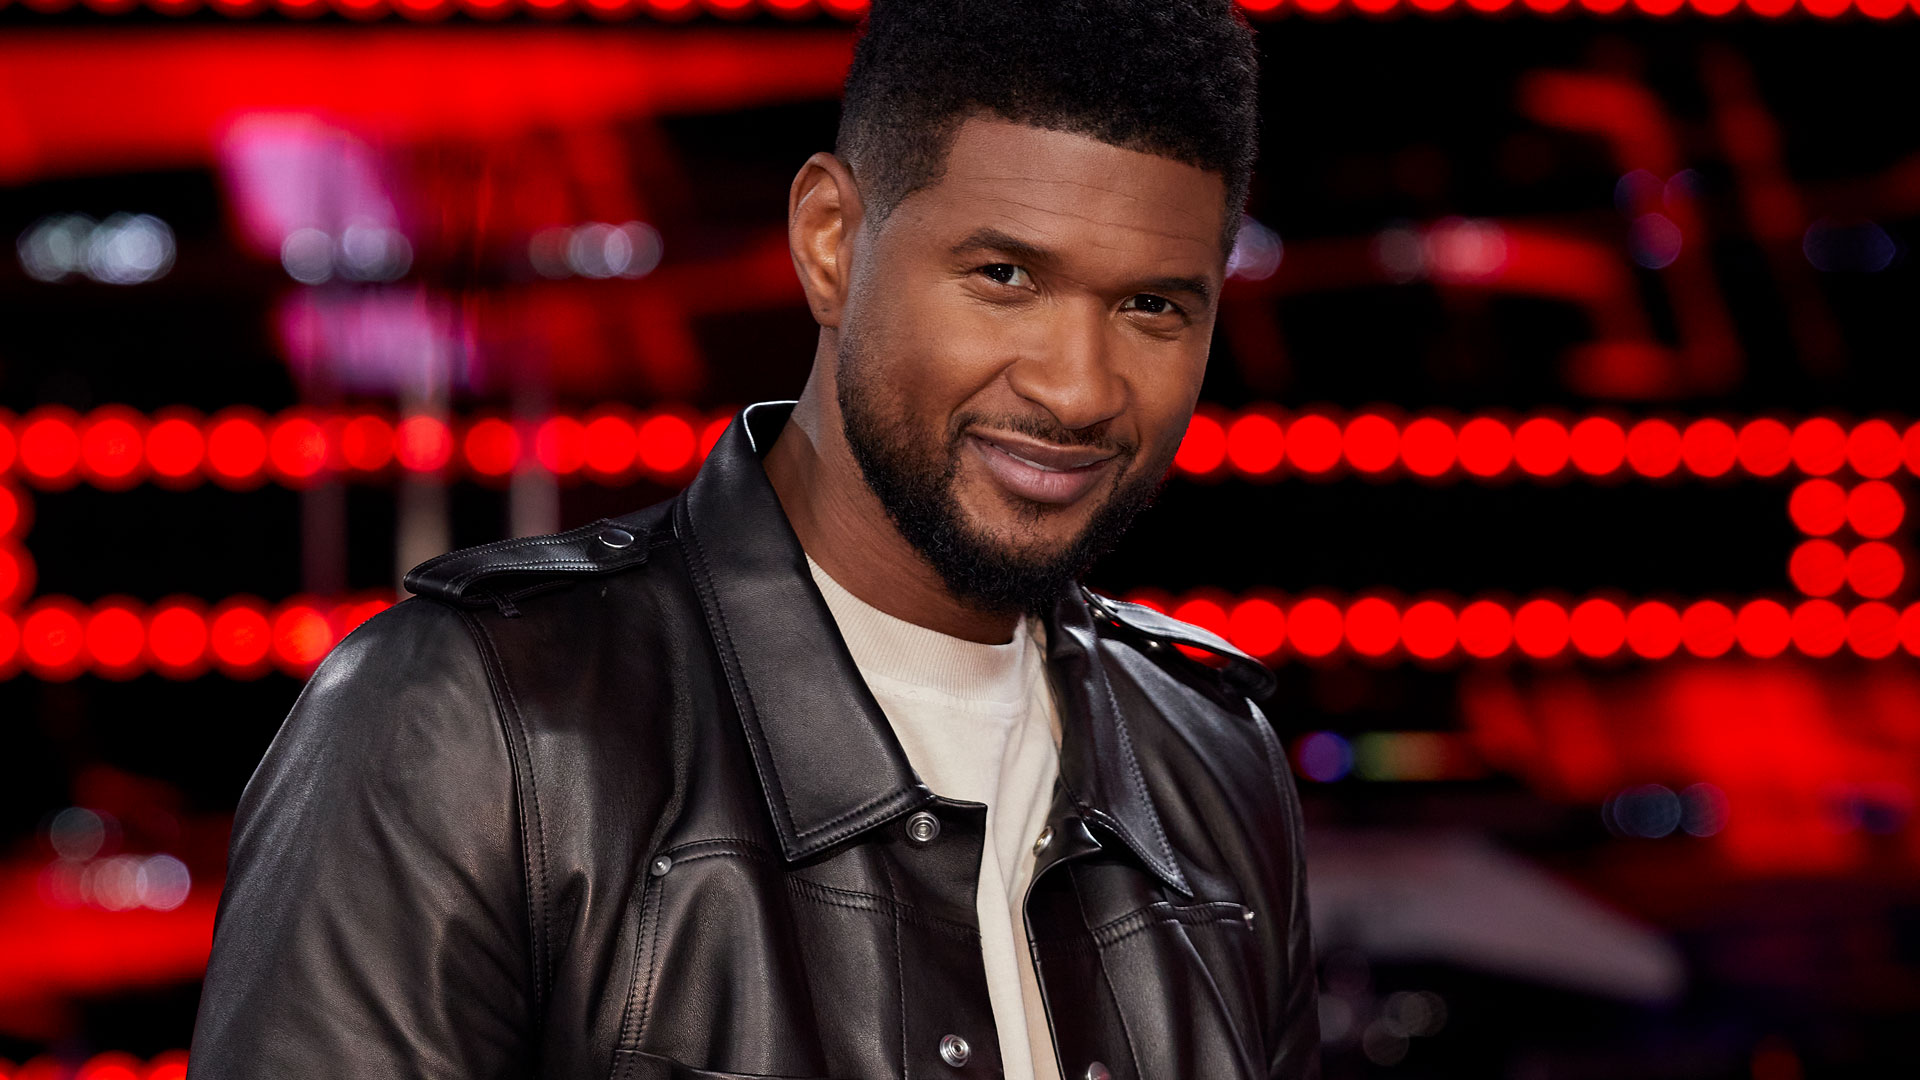 Watch The Voice Web Exclusive: Mega Mentor Usher Has Quite a Way with